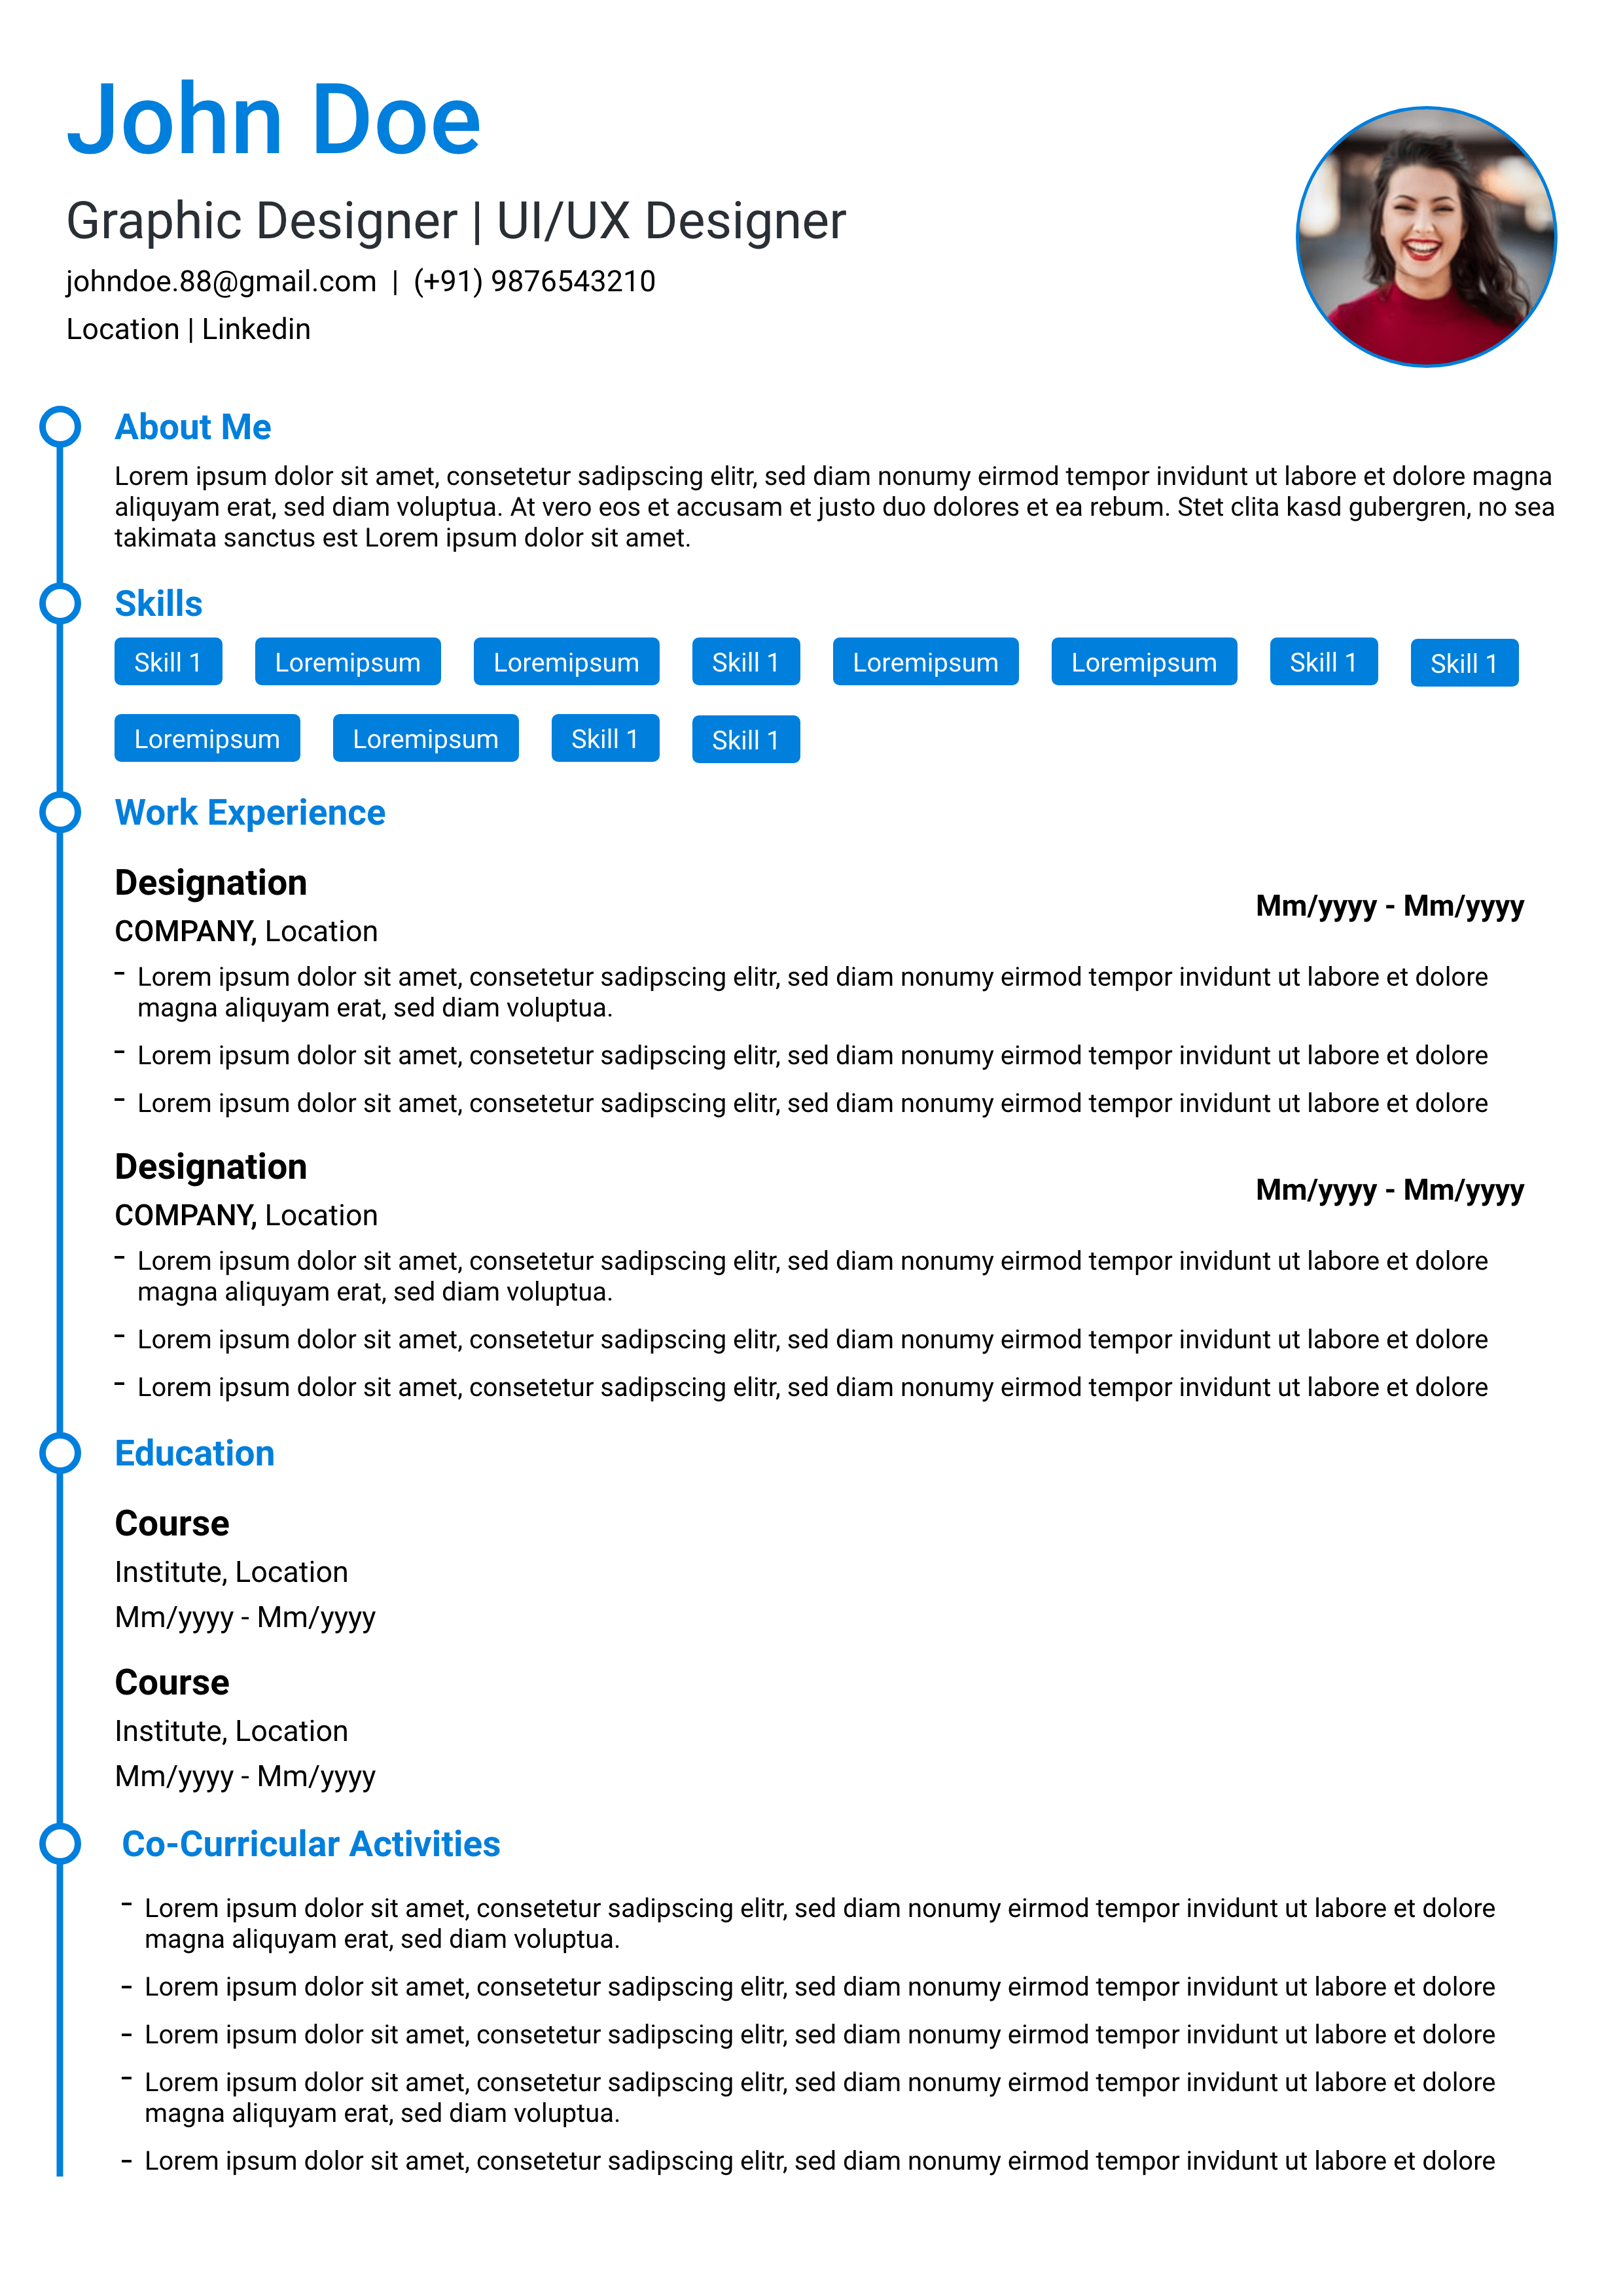 Professional resume template